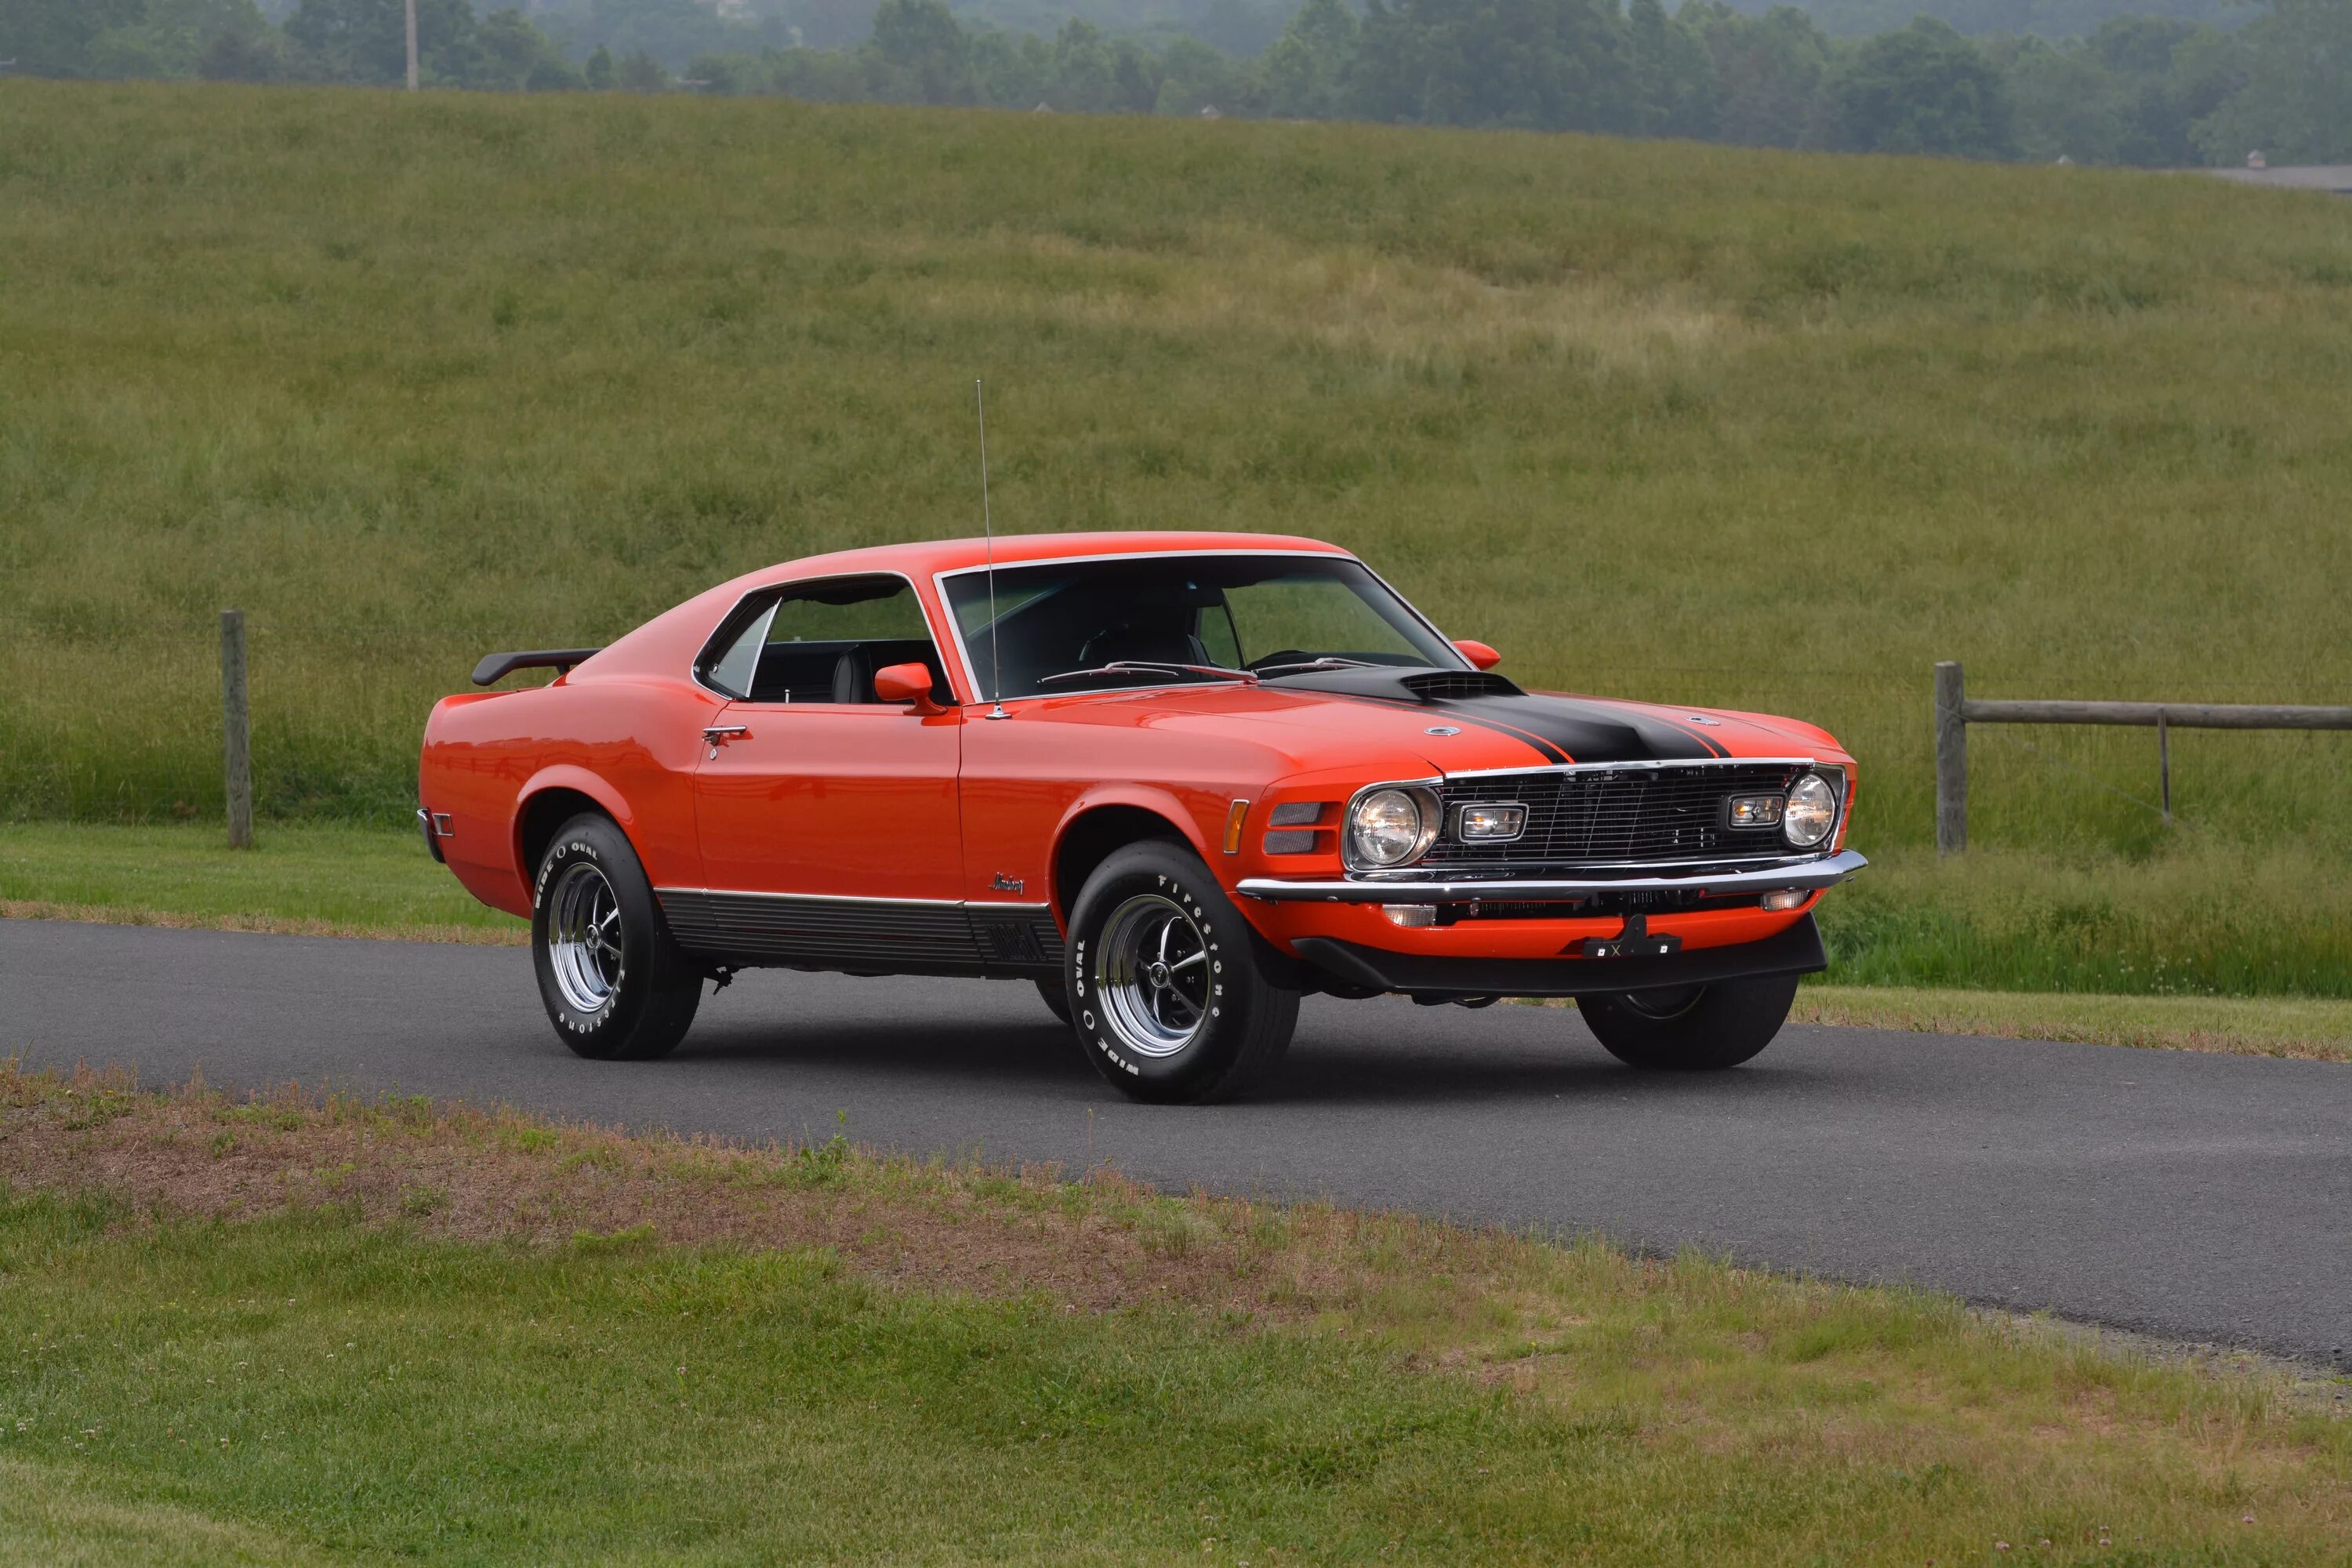 Ford Mustang Mach 1 1970. Ford Mustang Mach 1 Fastback. Ford Mustang Mach 1 Fastback 1970. Ford Mustang 1970 Fastback. Первые мустанги